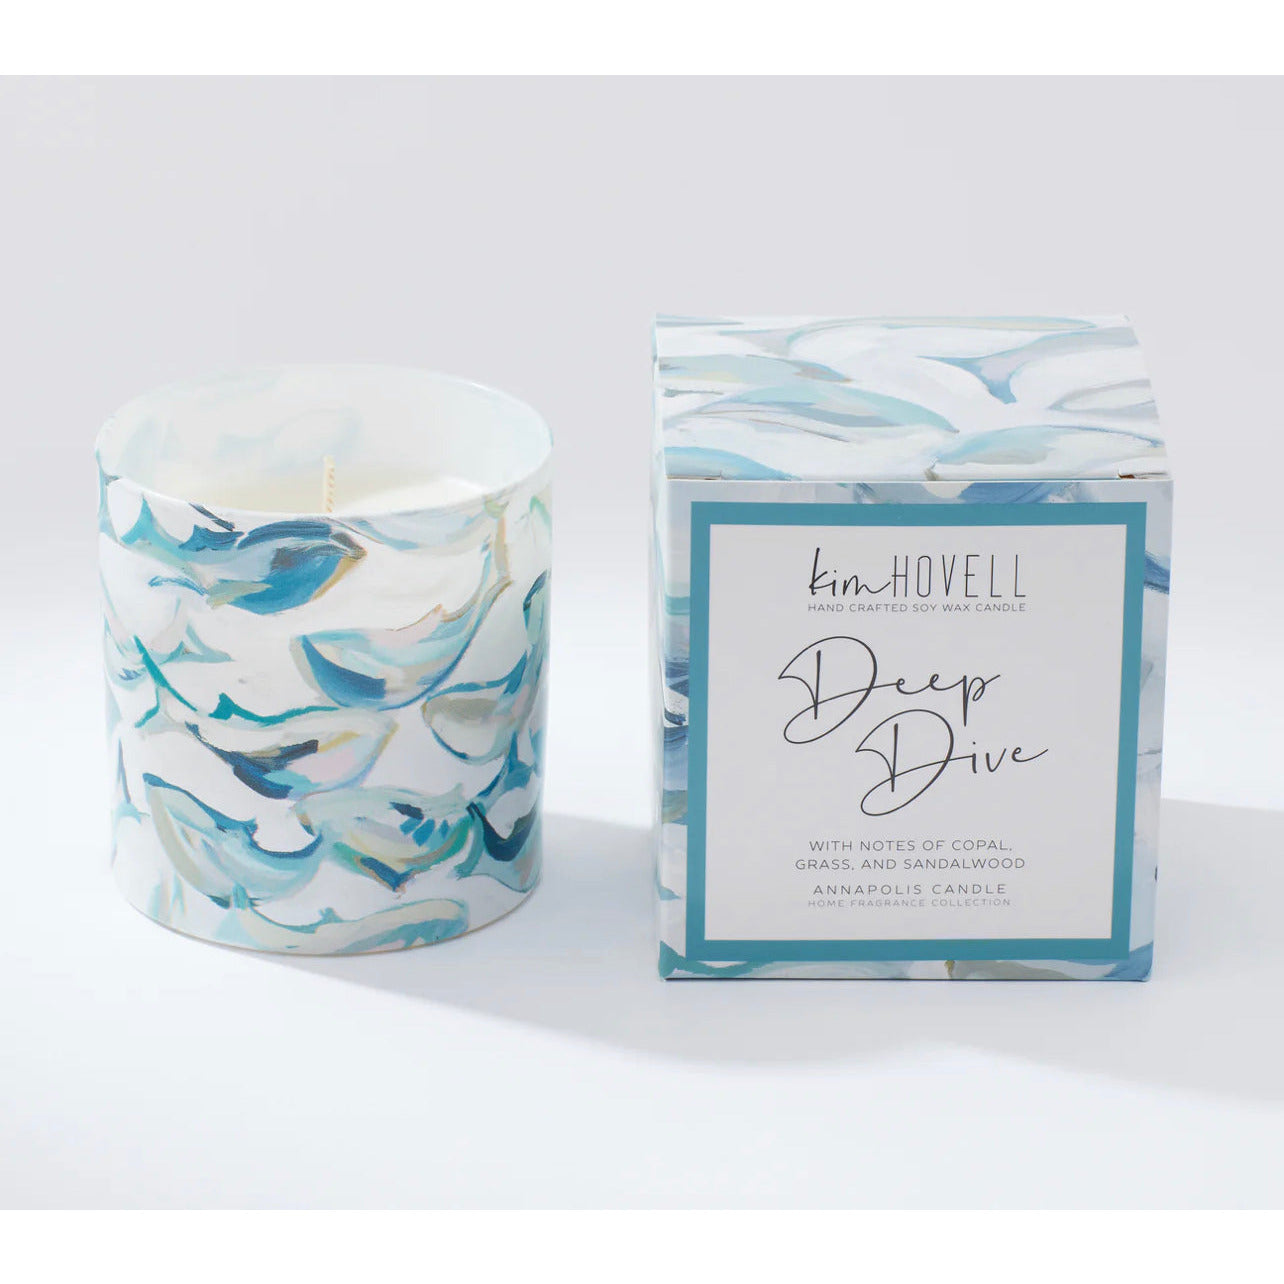 Kim Hovell Deep Dive Candle